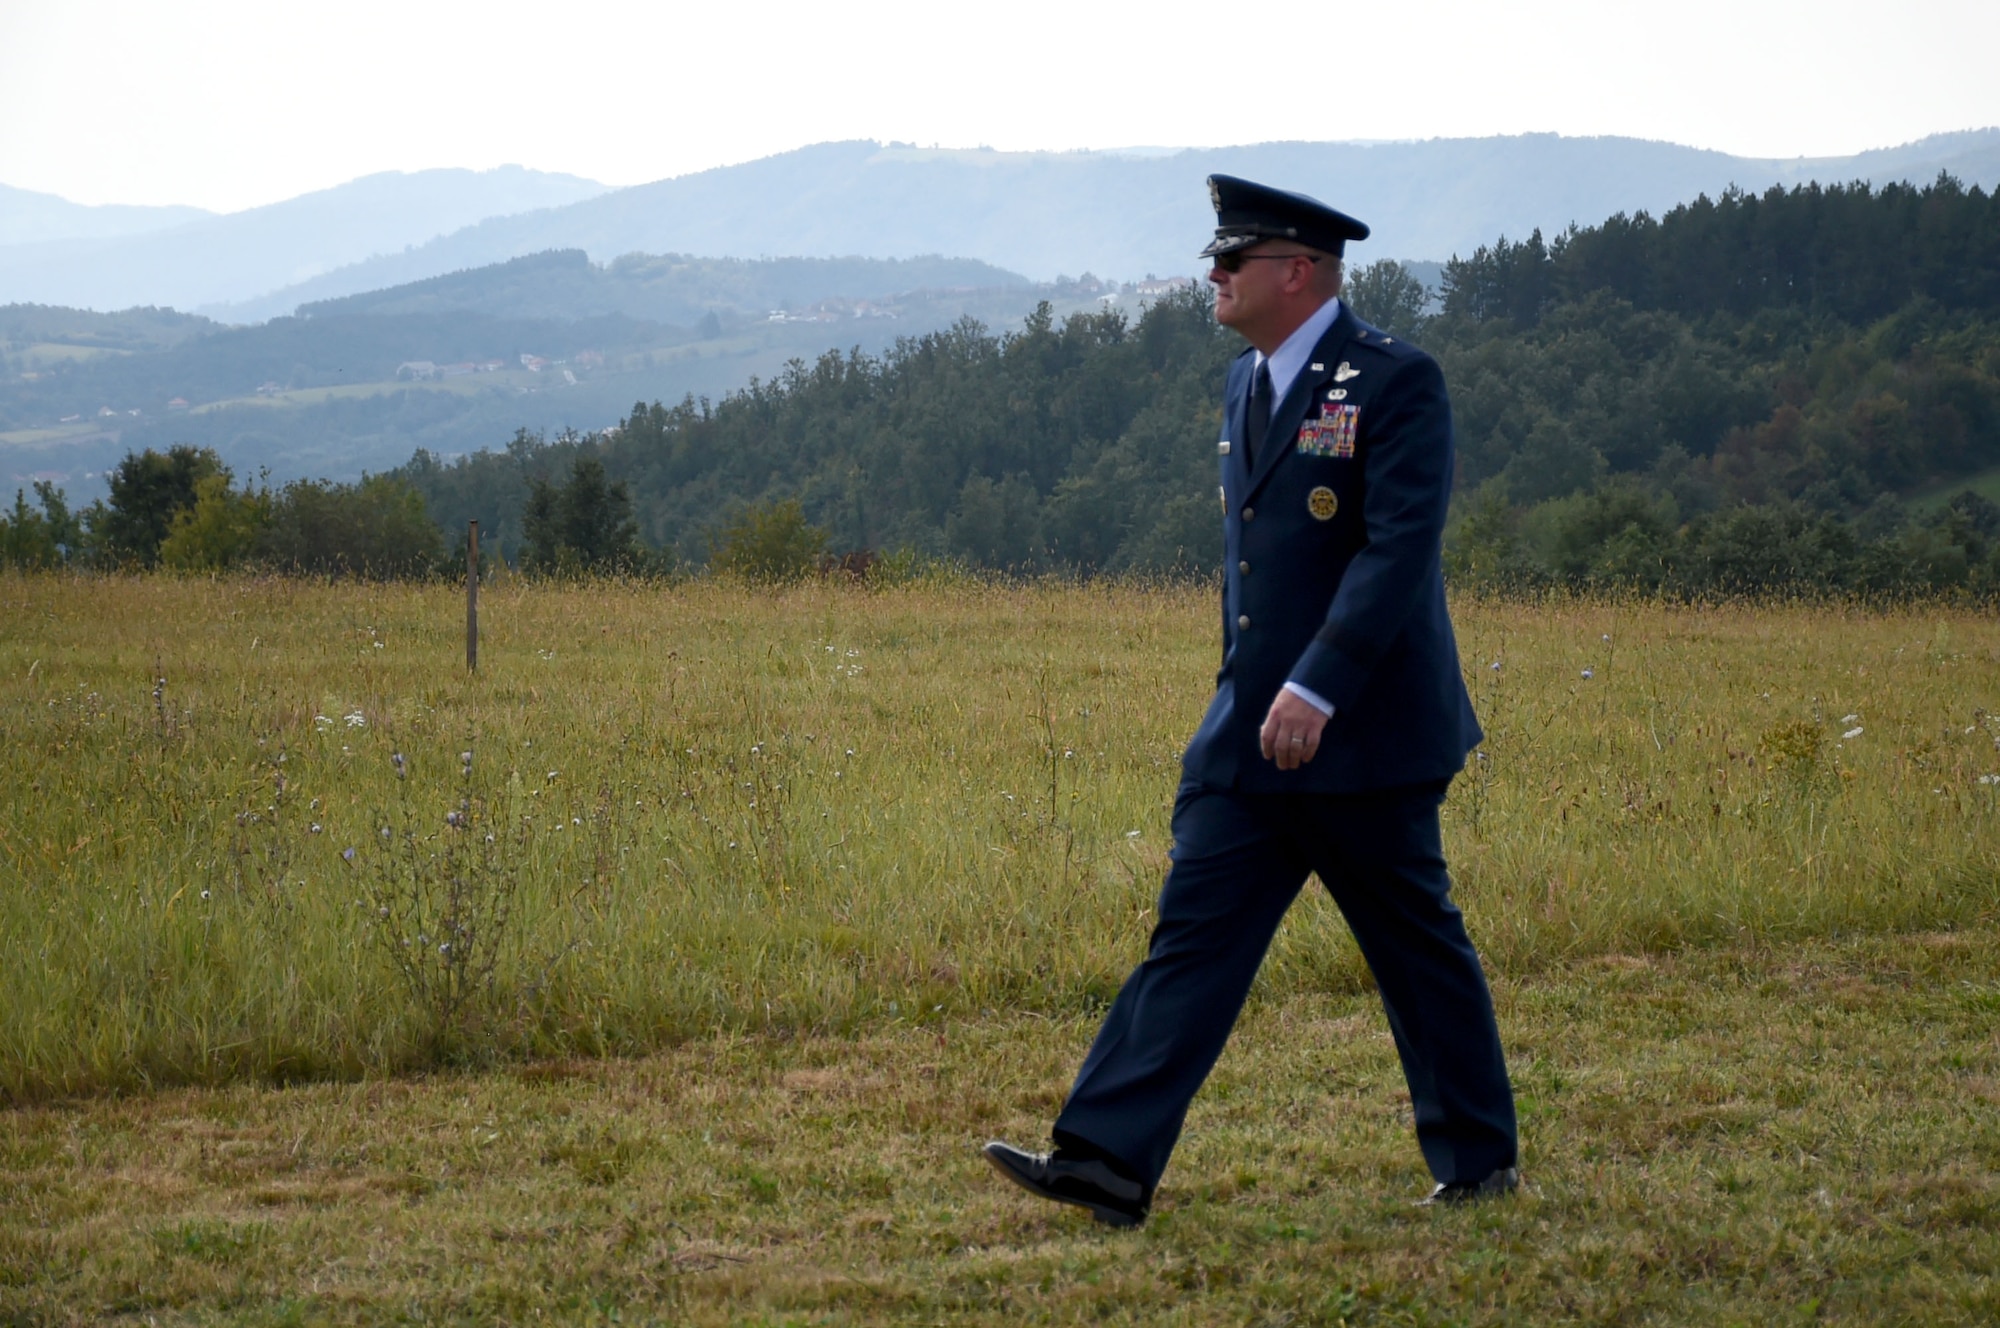 Brig. Gen. Richard G. Moore Jr., U.S. Air Forces in Europe Chief of Staff, walks through a field outside of Pranjani, Serbia, on Sept. 22nd, 2018, during the 74th Halyard Mission Commemoration. Fields like this were used from Aug 1944 to Feb 1945, with the help of the Serbian population and the Yugoslav Armed Forces in the Homeland, to transport more than 500 U.S. and allied airmen from improvised runways in Serbia and Bosnia and Herzegovina to U.S. airbases in Italy. (U.S. Air Force photo by TSgt Stephen Ocenosak)